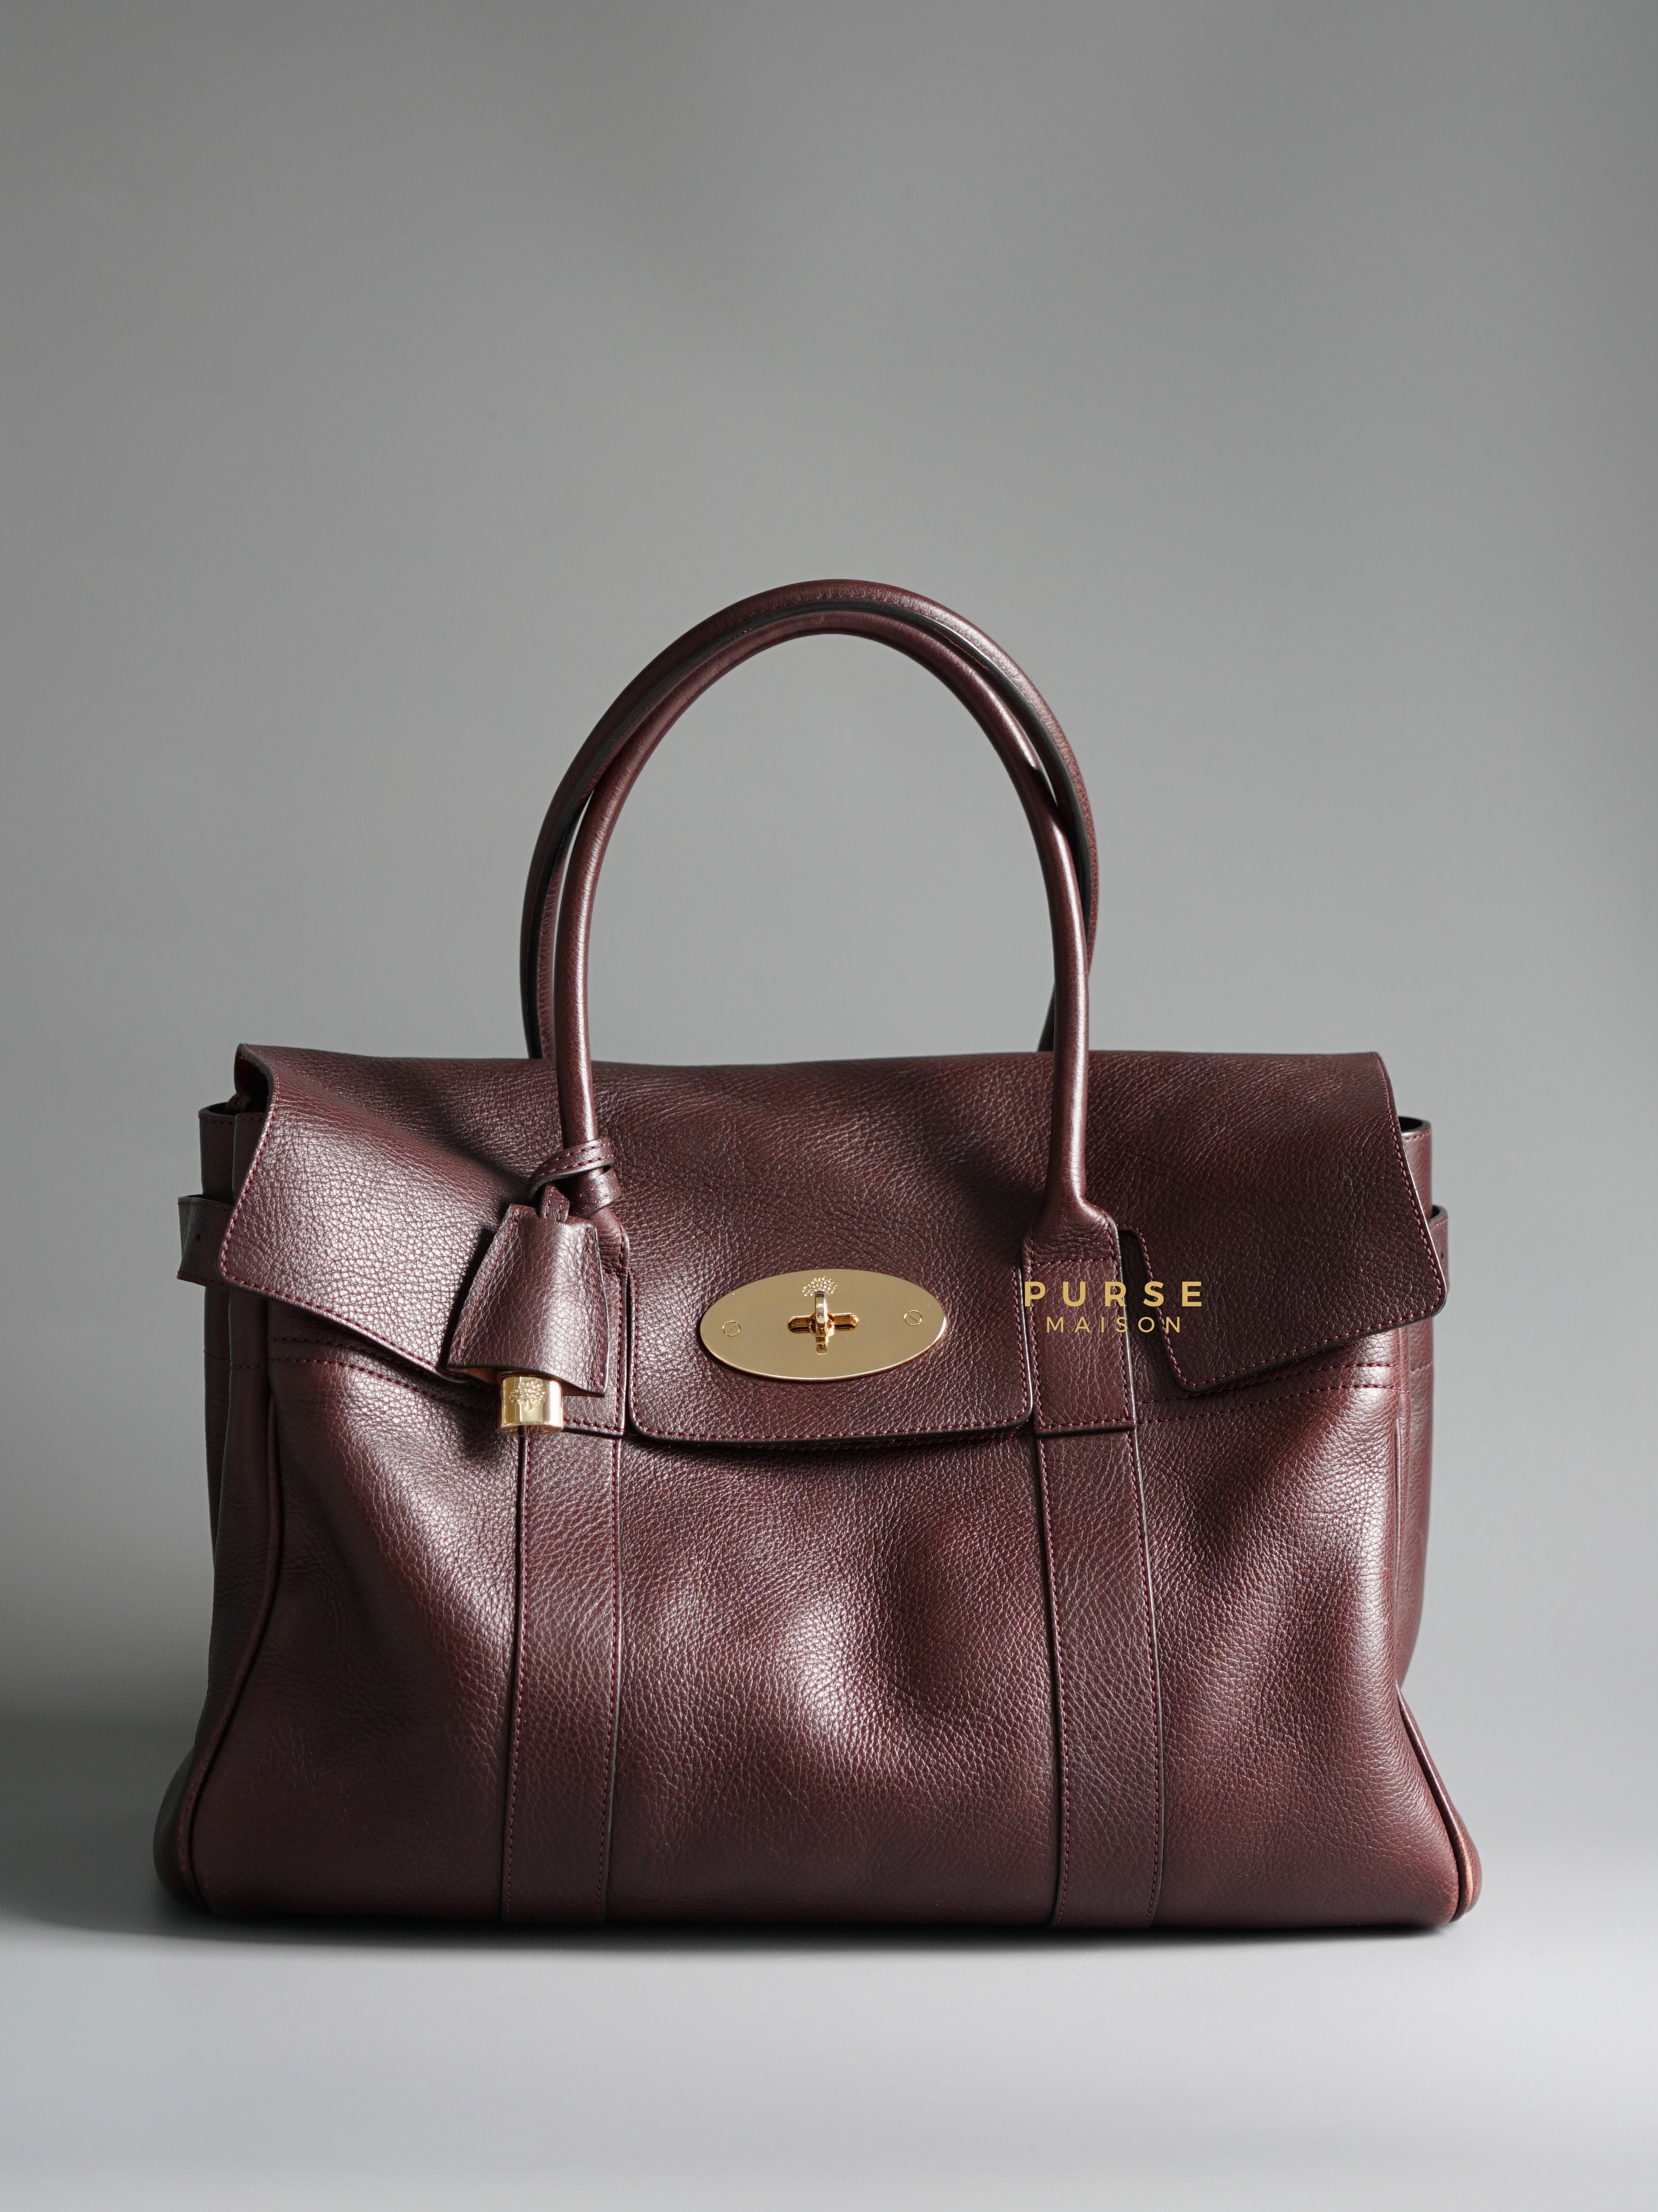 Mulberry Bayswater Oxblood Grained Leather Tote Bag | Purse Maison Luxury Bags Shop